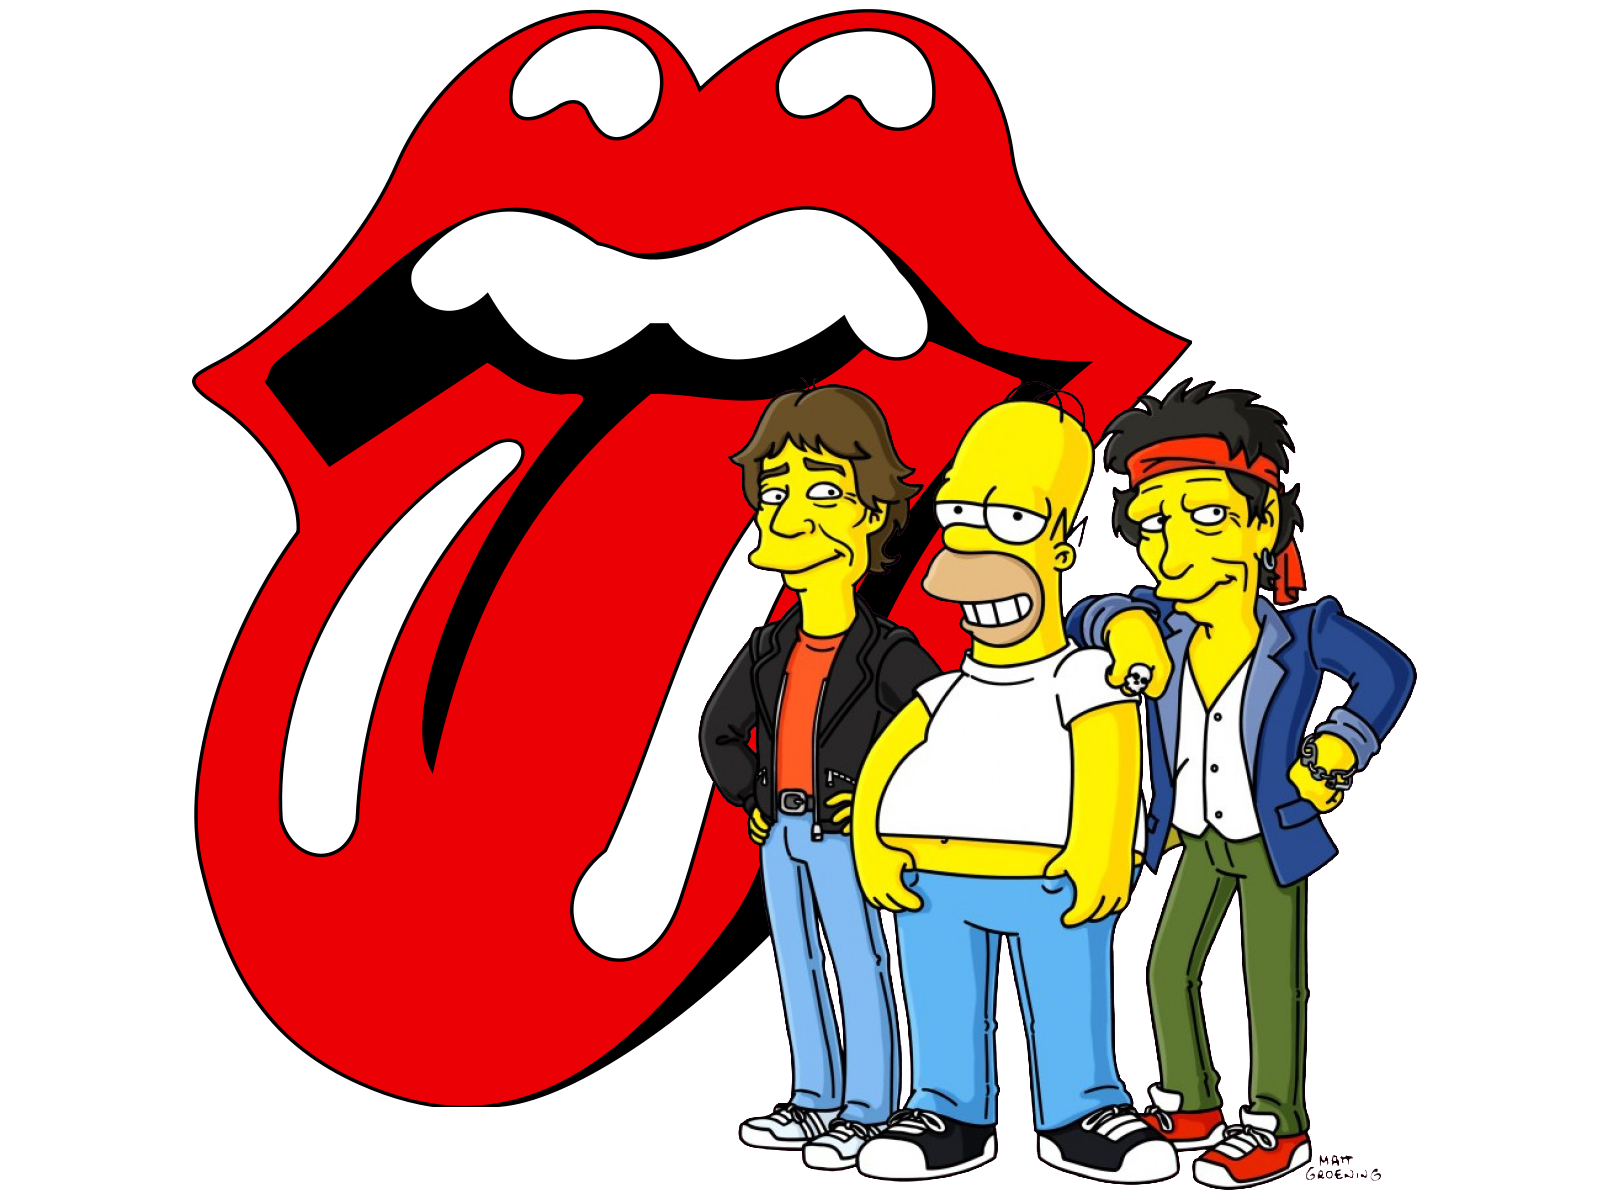 Rolling Stones Logo The Simpsons Homer Simpson Tongues Smiling Cartoon Mick Jagger Keith Richards Si 1600x1200